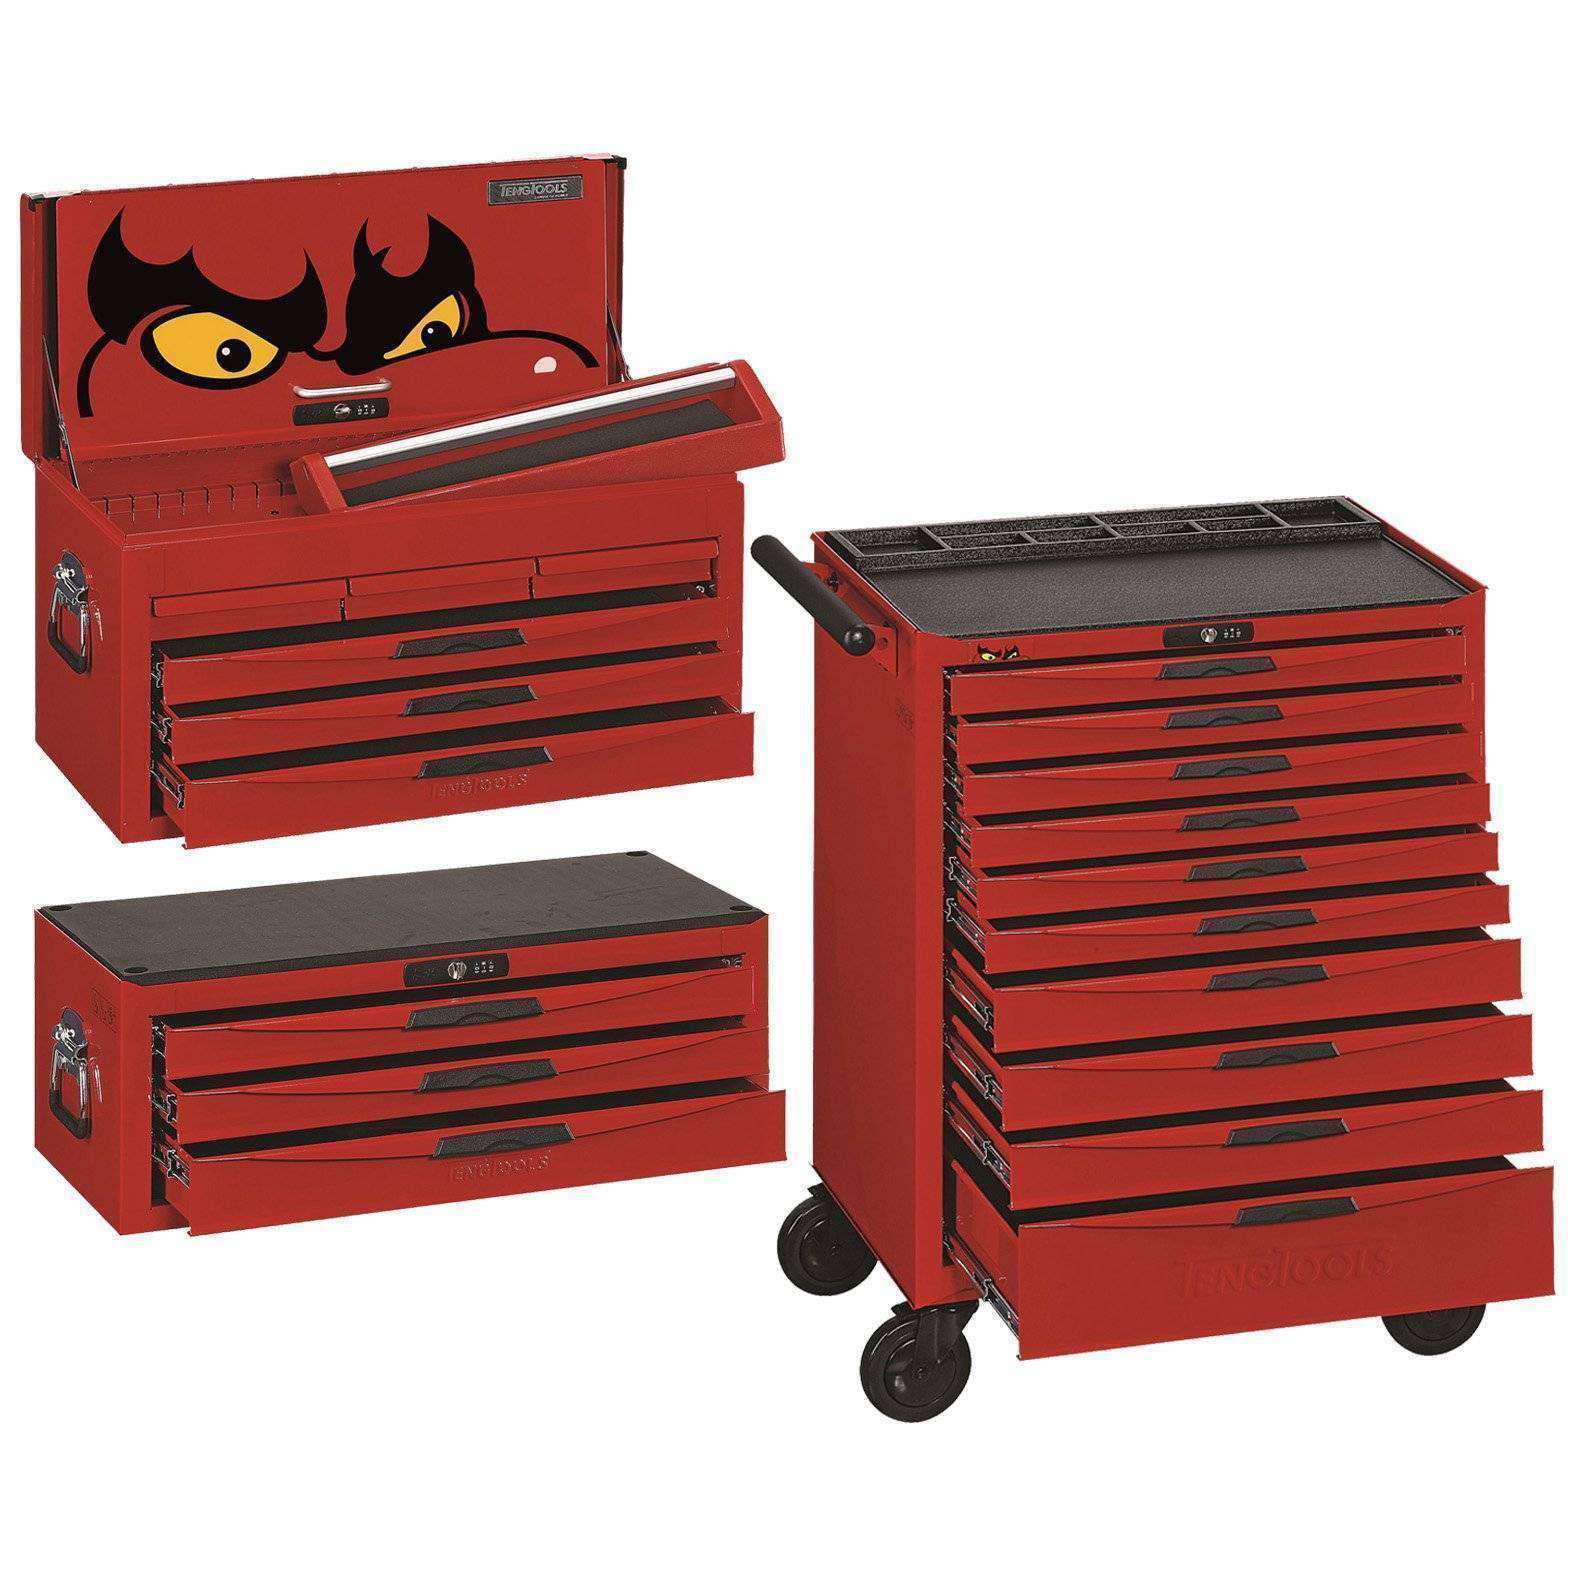 Teng Tools 8 Series 10 Drawer Roller Cabinet, 3 Drawer Middle And 6 Drawer Top Box - TCW810N